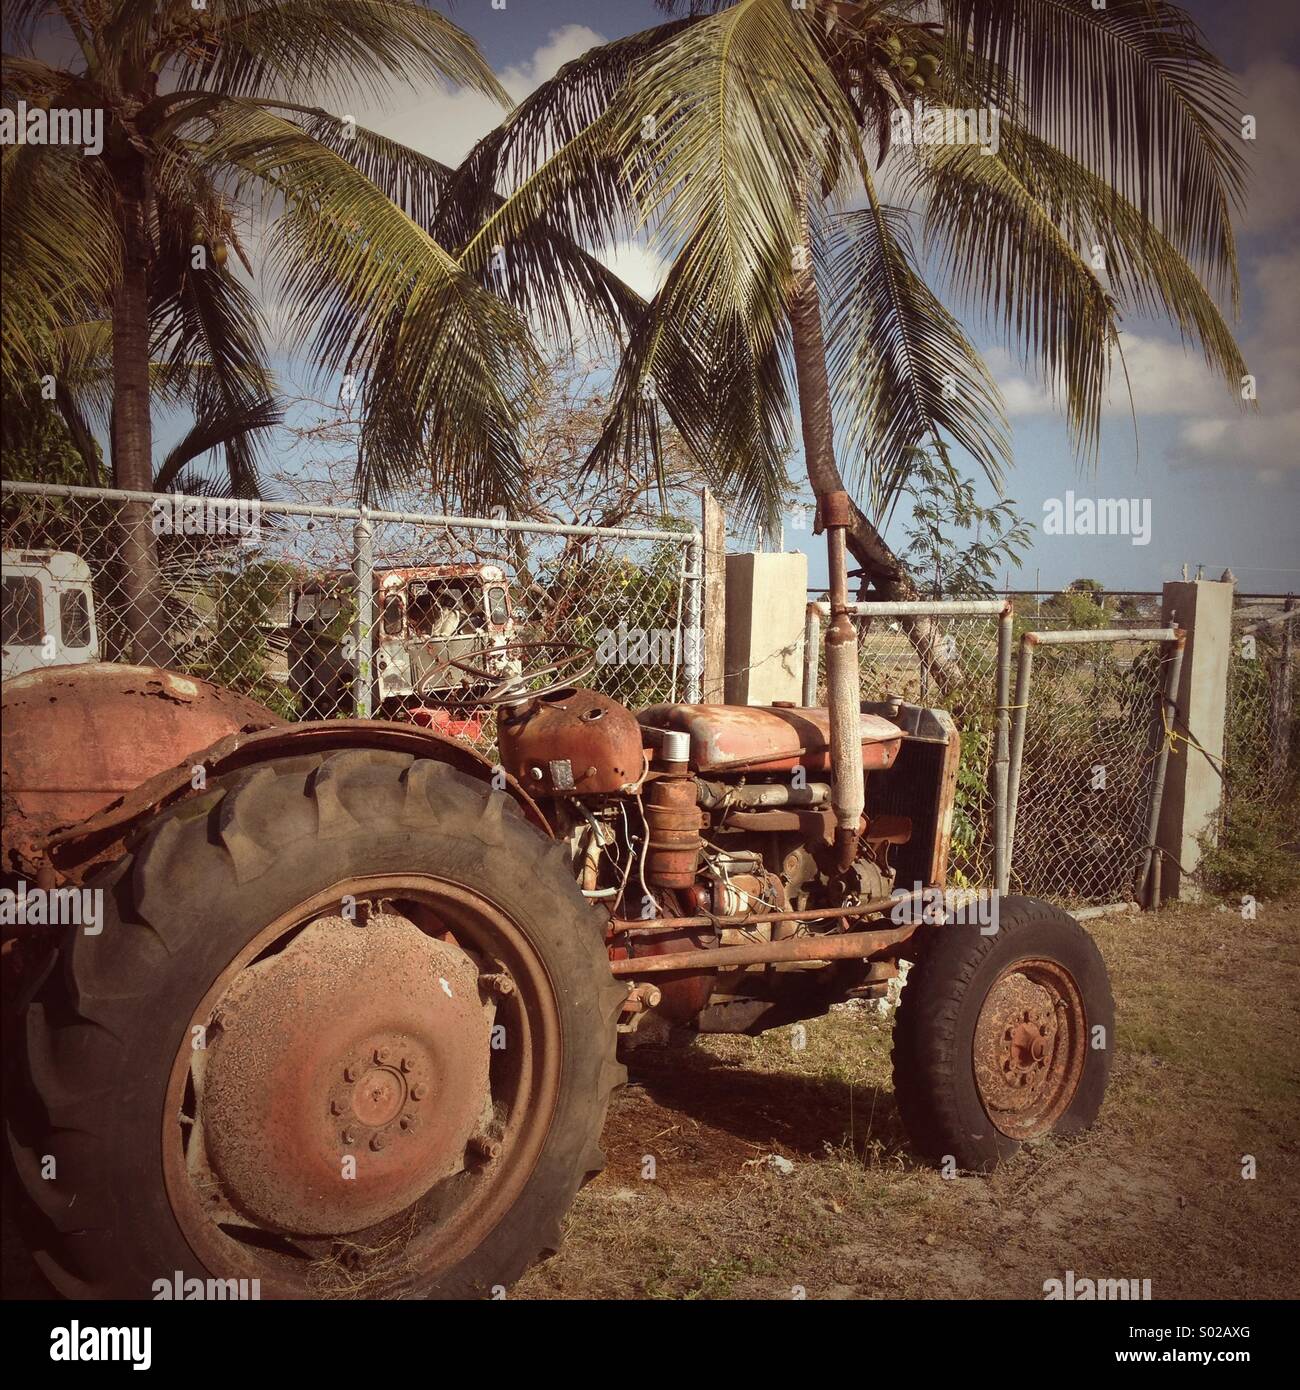 Rusty old tractor beside palm trees, in tropical Barbuda. Stock Photo